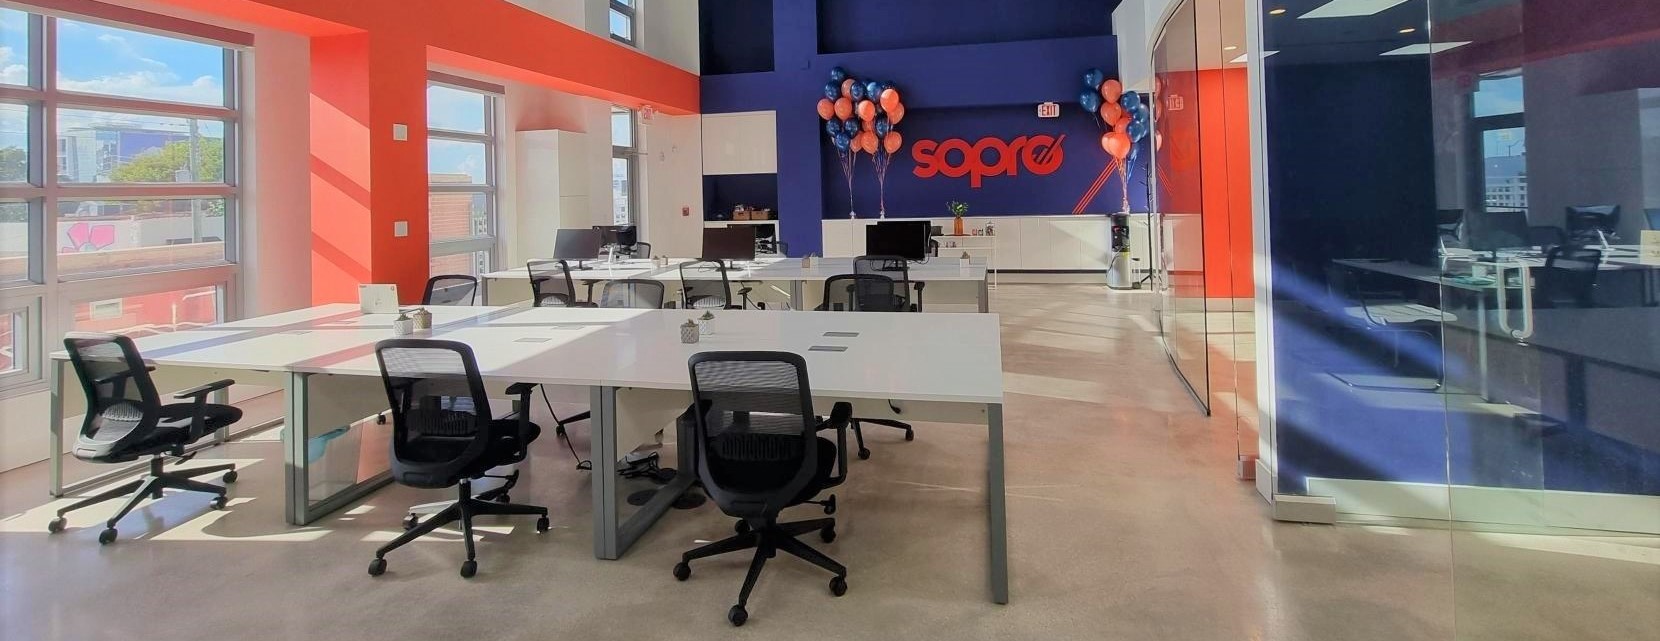 Good morning USA! Sopro Miami office is now open!